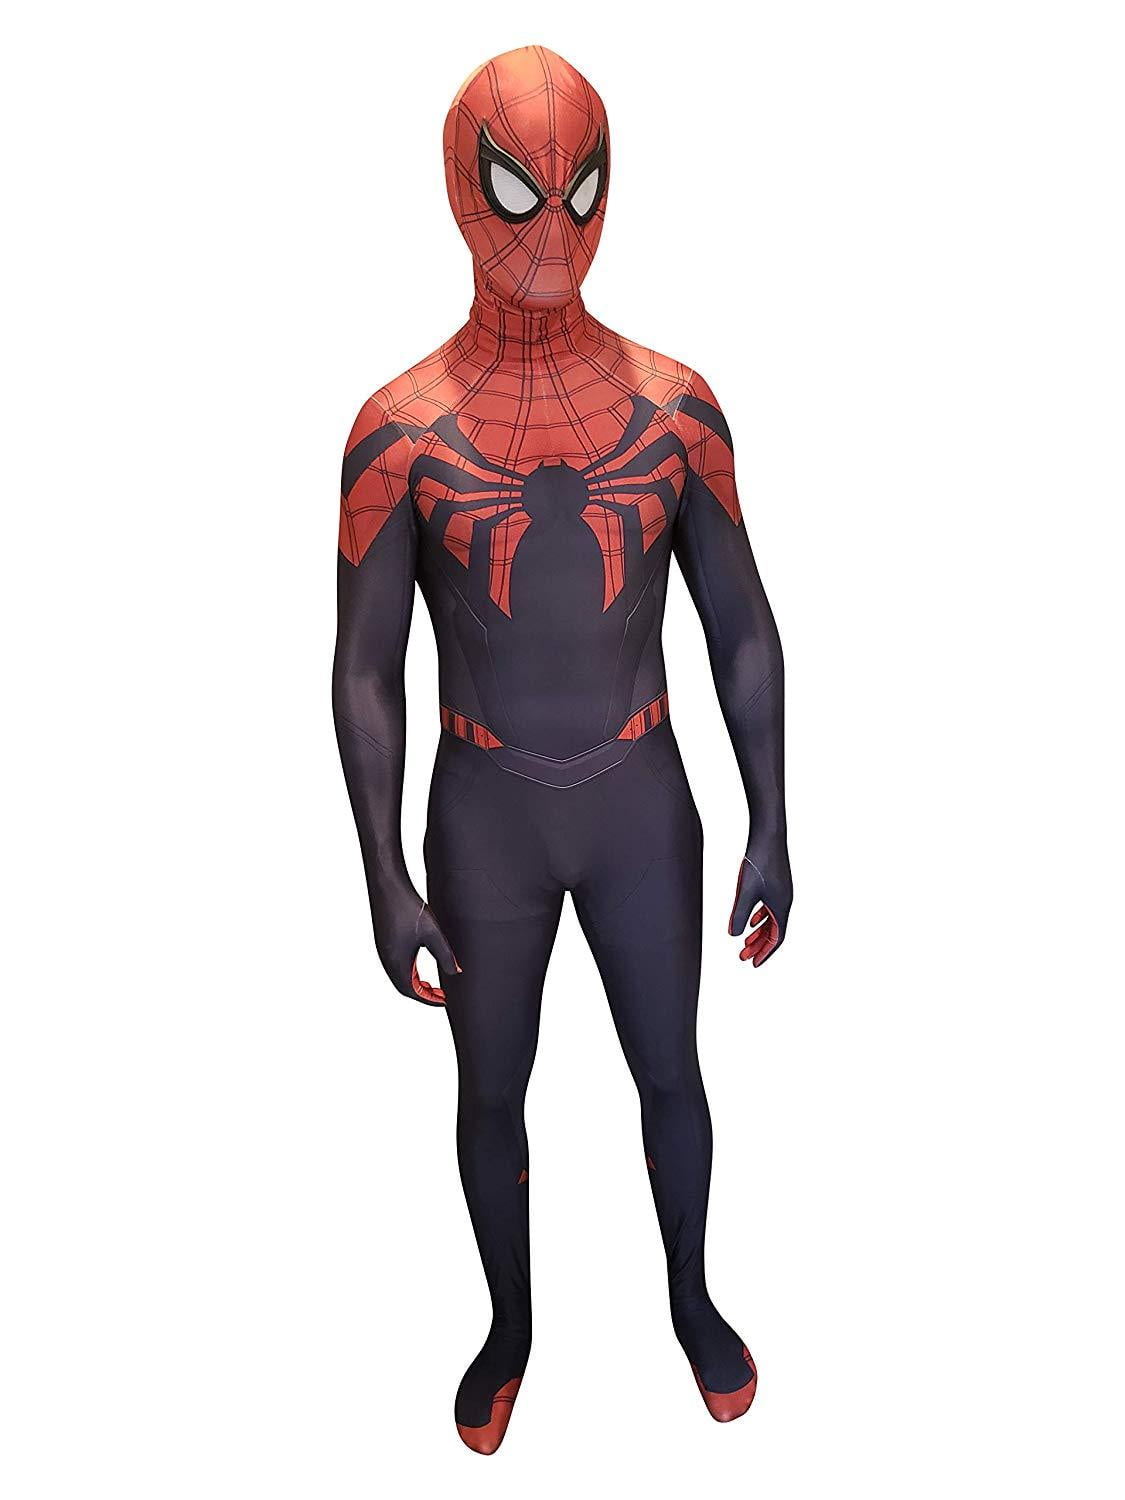 Spider-Man White Spider Cosplay Jumpsuit Superhero Outfit For Halloween Party